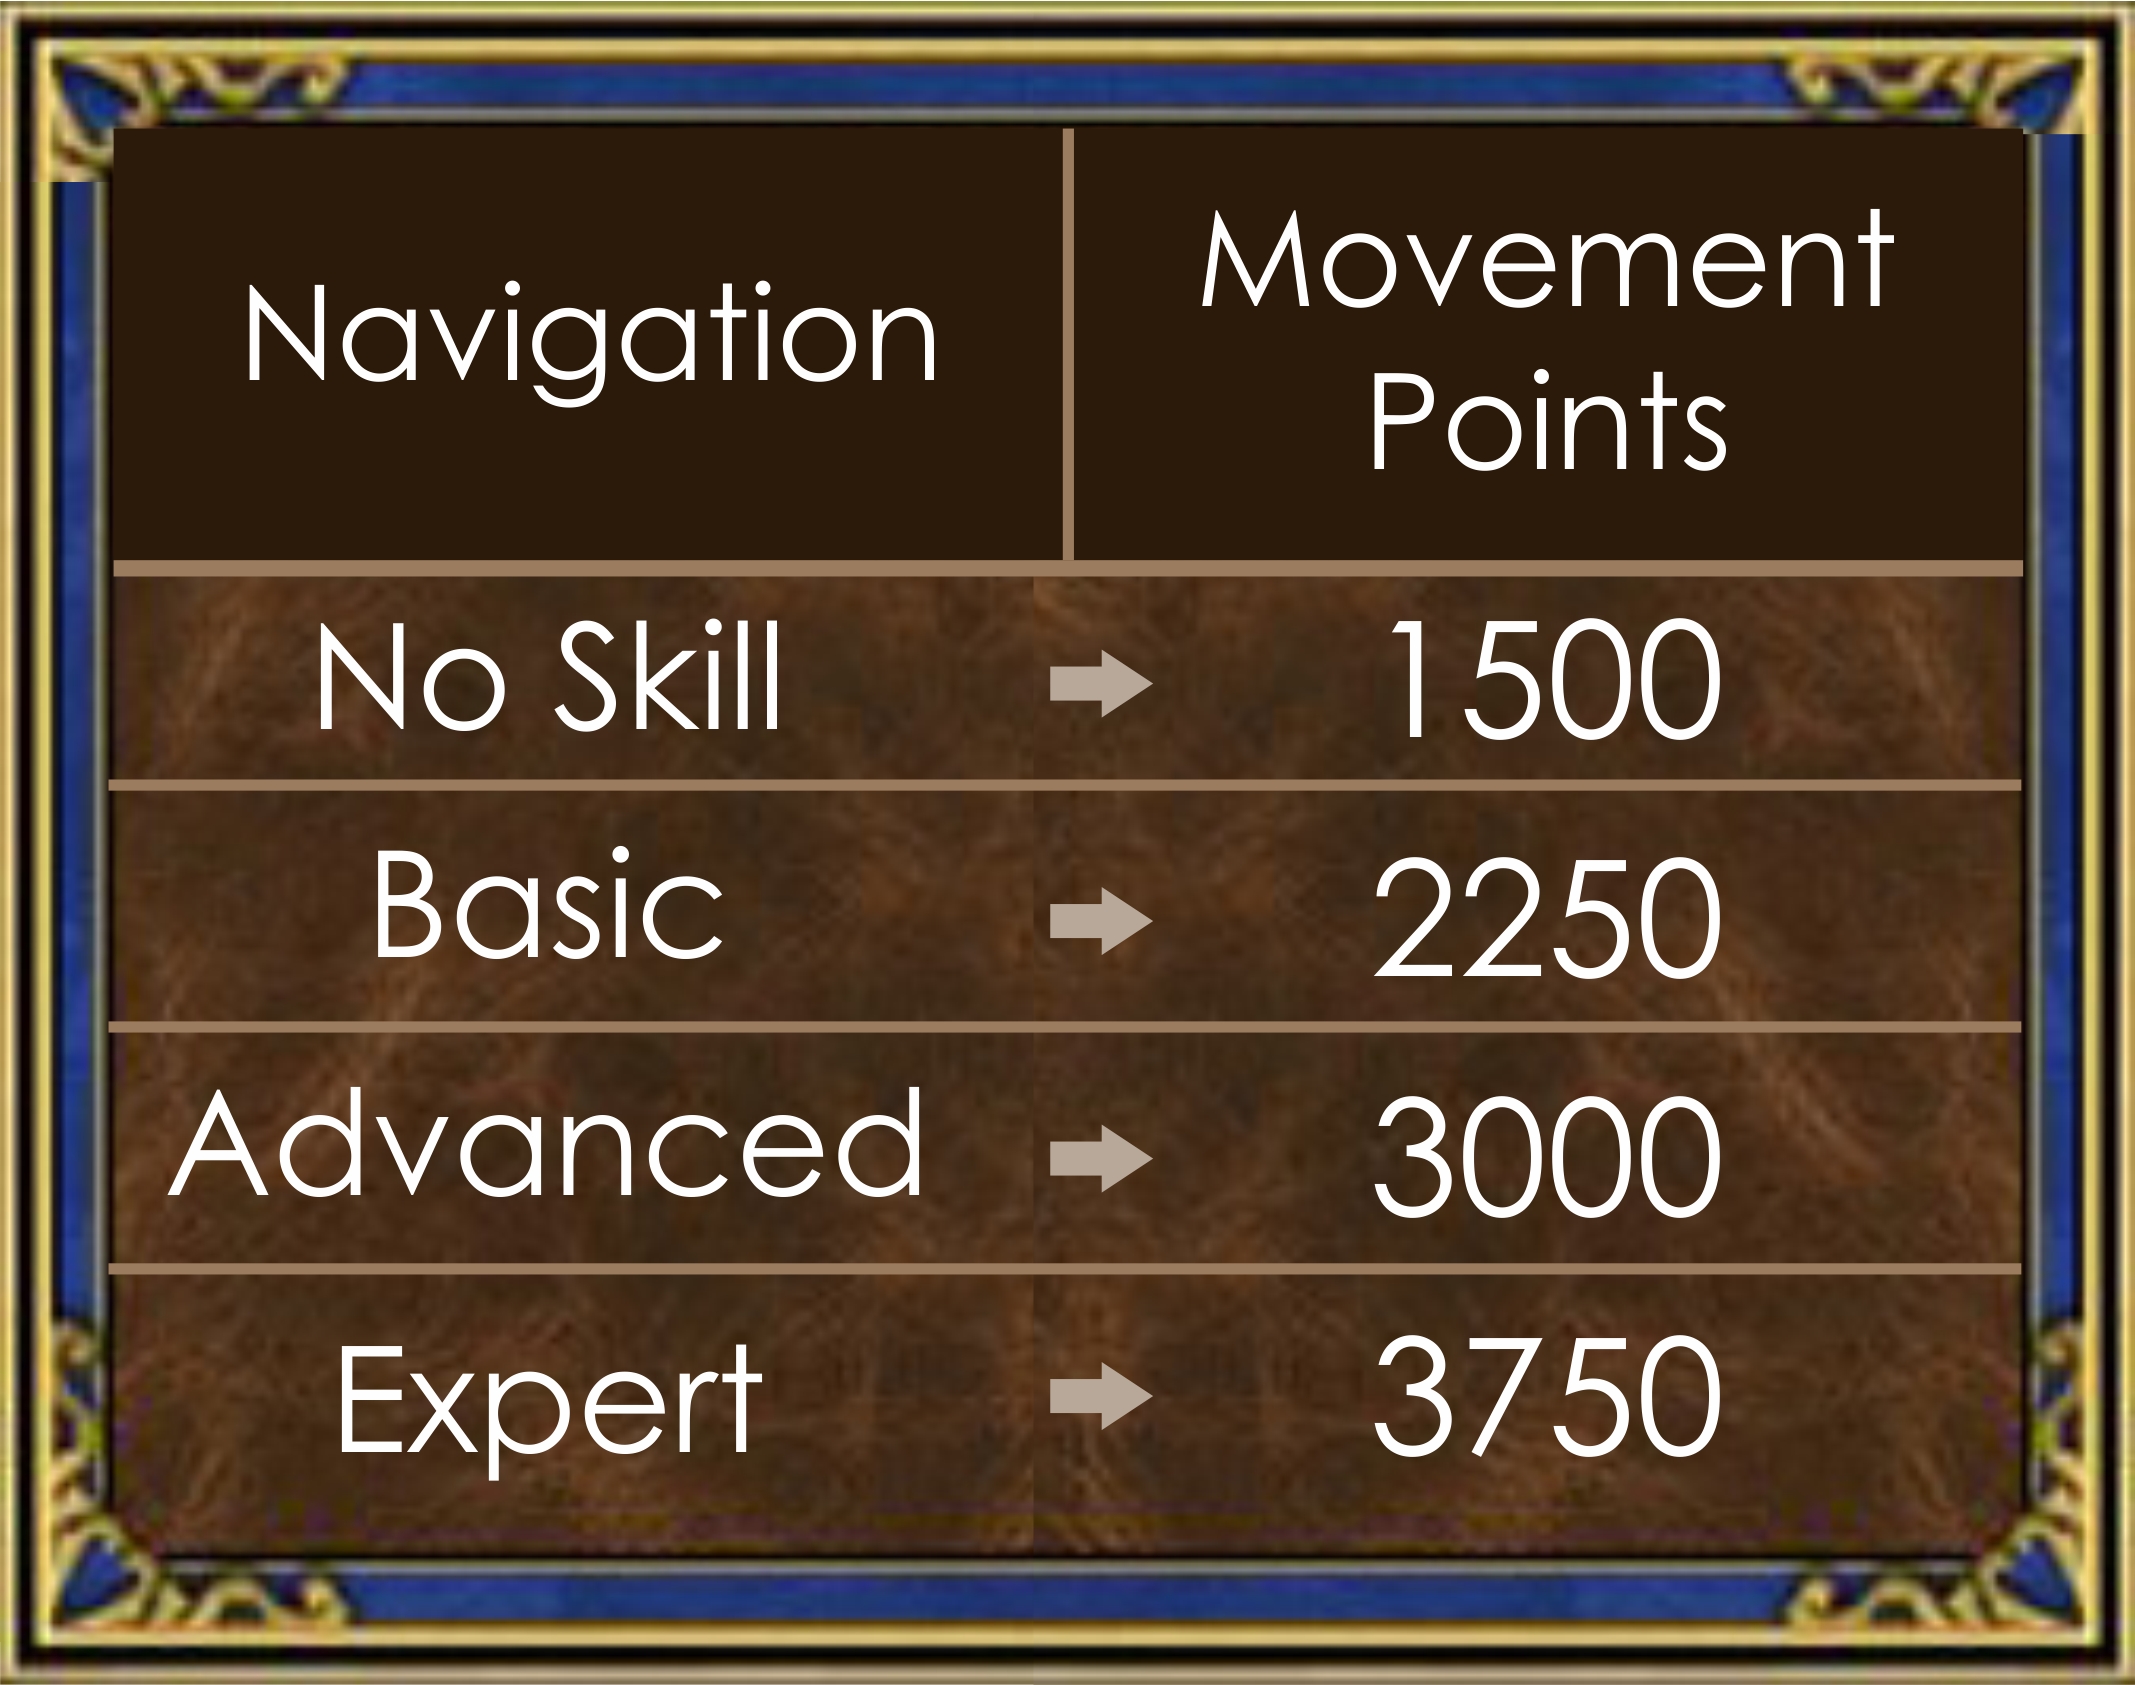 Heroes 3 Navigation level and movement point increases